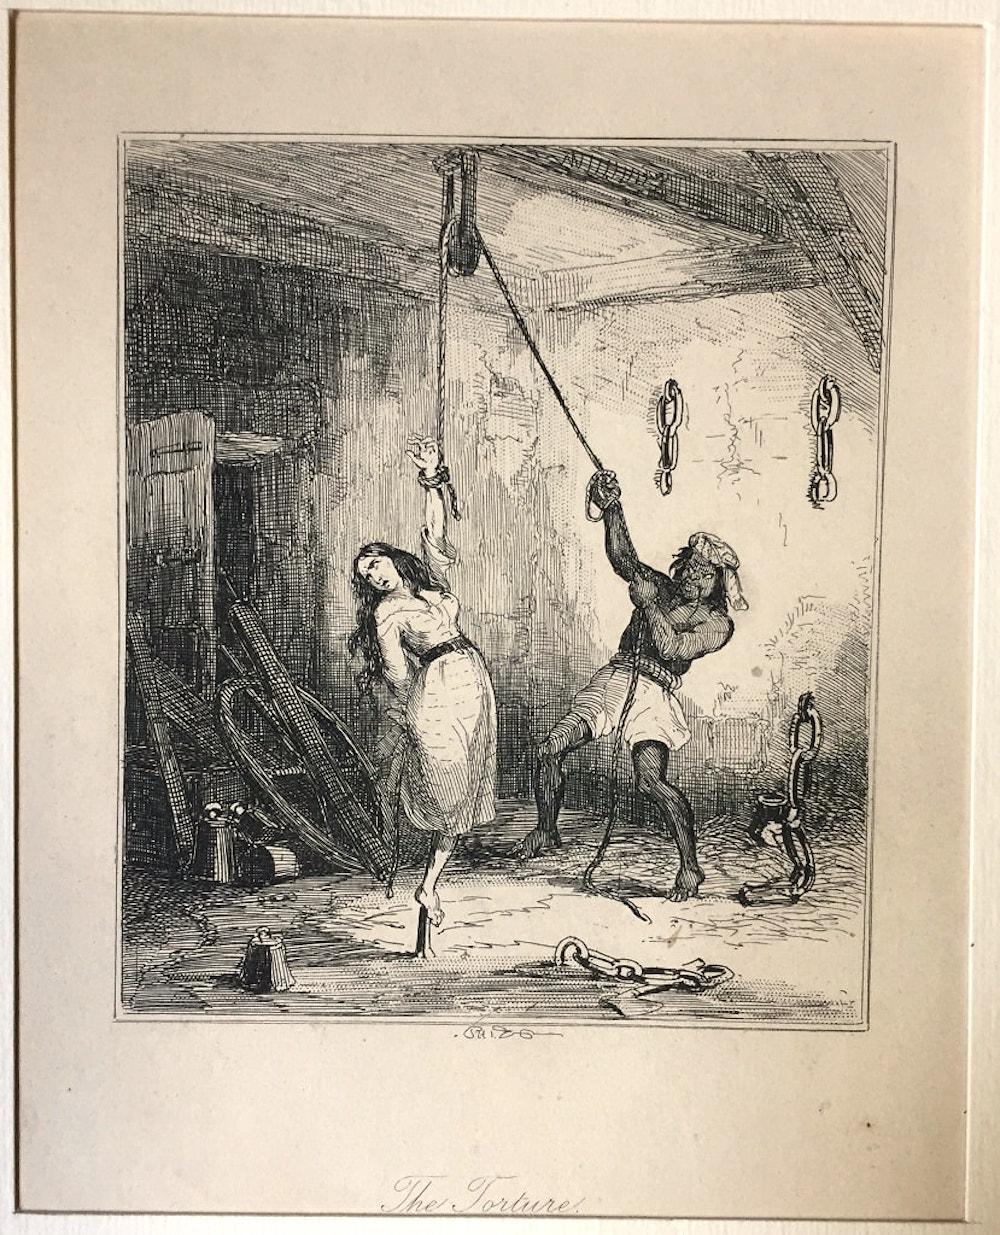 Browne Hablot Knight  Figurative Print - The Torture - Original Etching by PHIZ - Mid 19th Century 